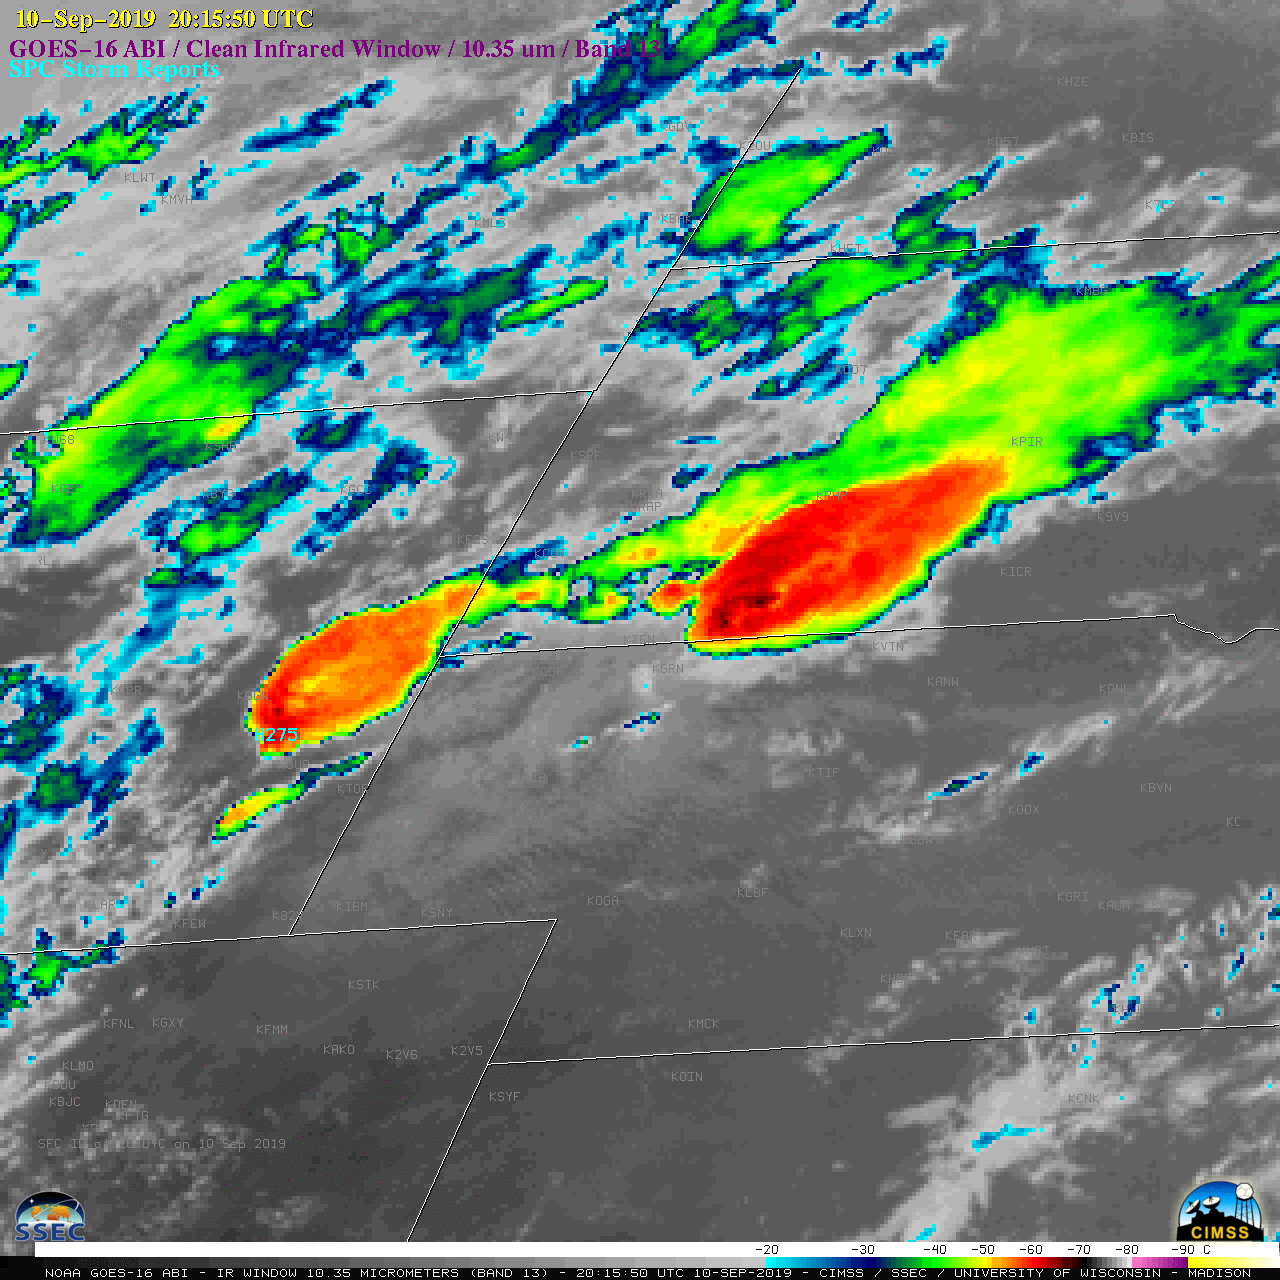 GOES-16 "Clean" Infrared Window (10.35 µm) images, with SPC Storm Reports plotted in cyan [click to play animation | MP4]